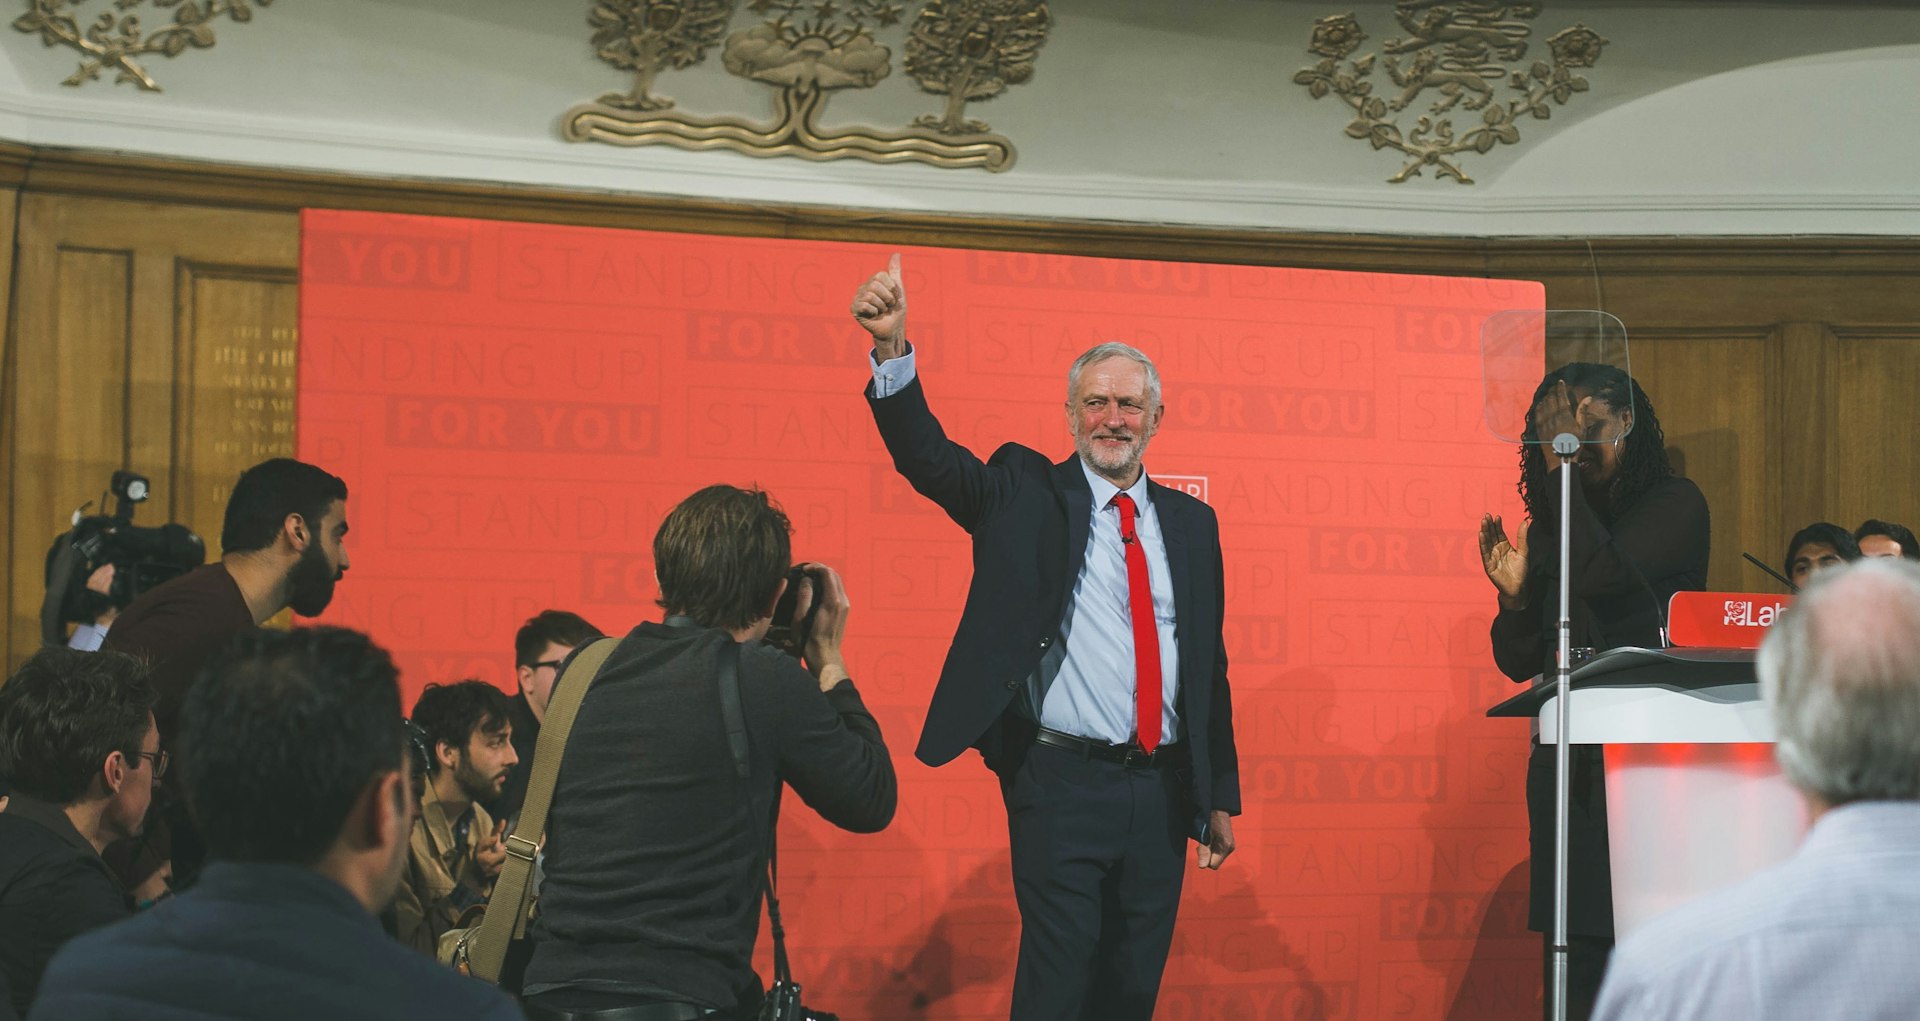 Five easy ways to convince your nan and grandad to vote Labour